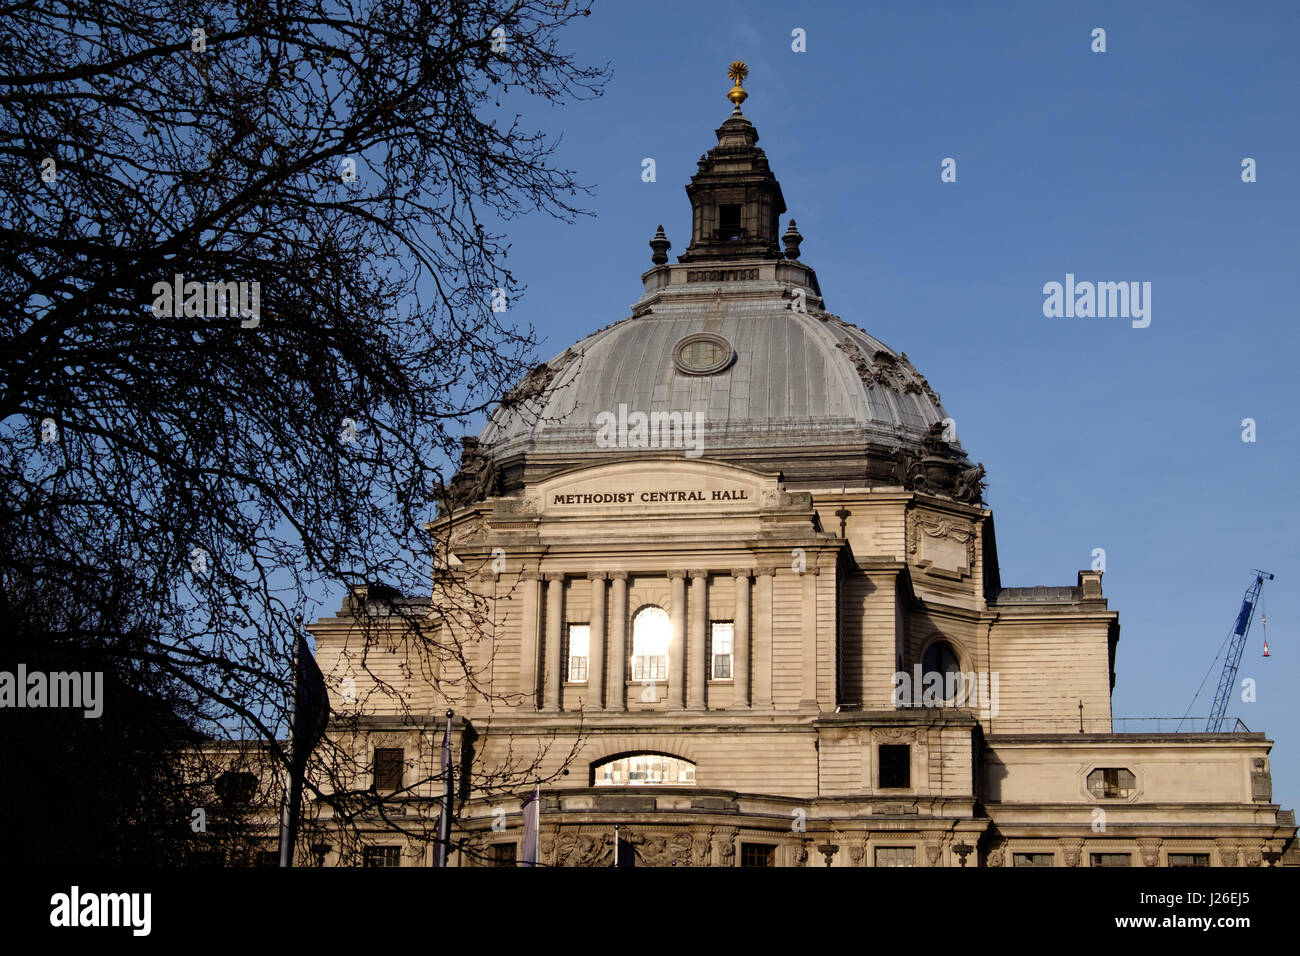 Methodist Central Hall in Westminster, London, England, UK, Europe Stock Photo